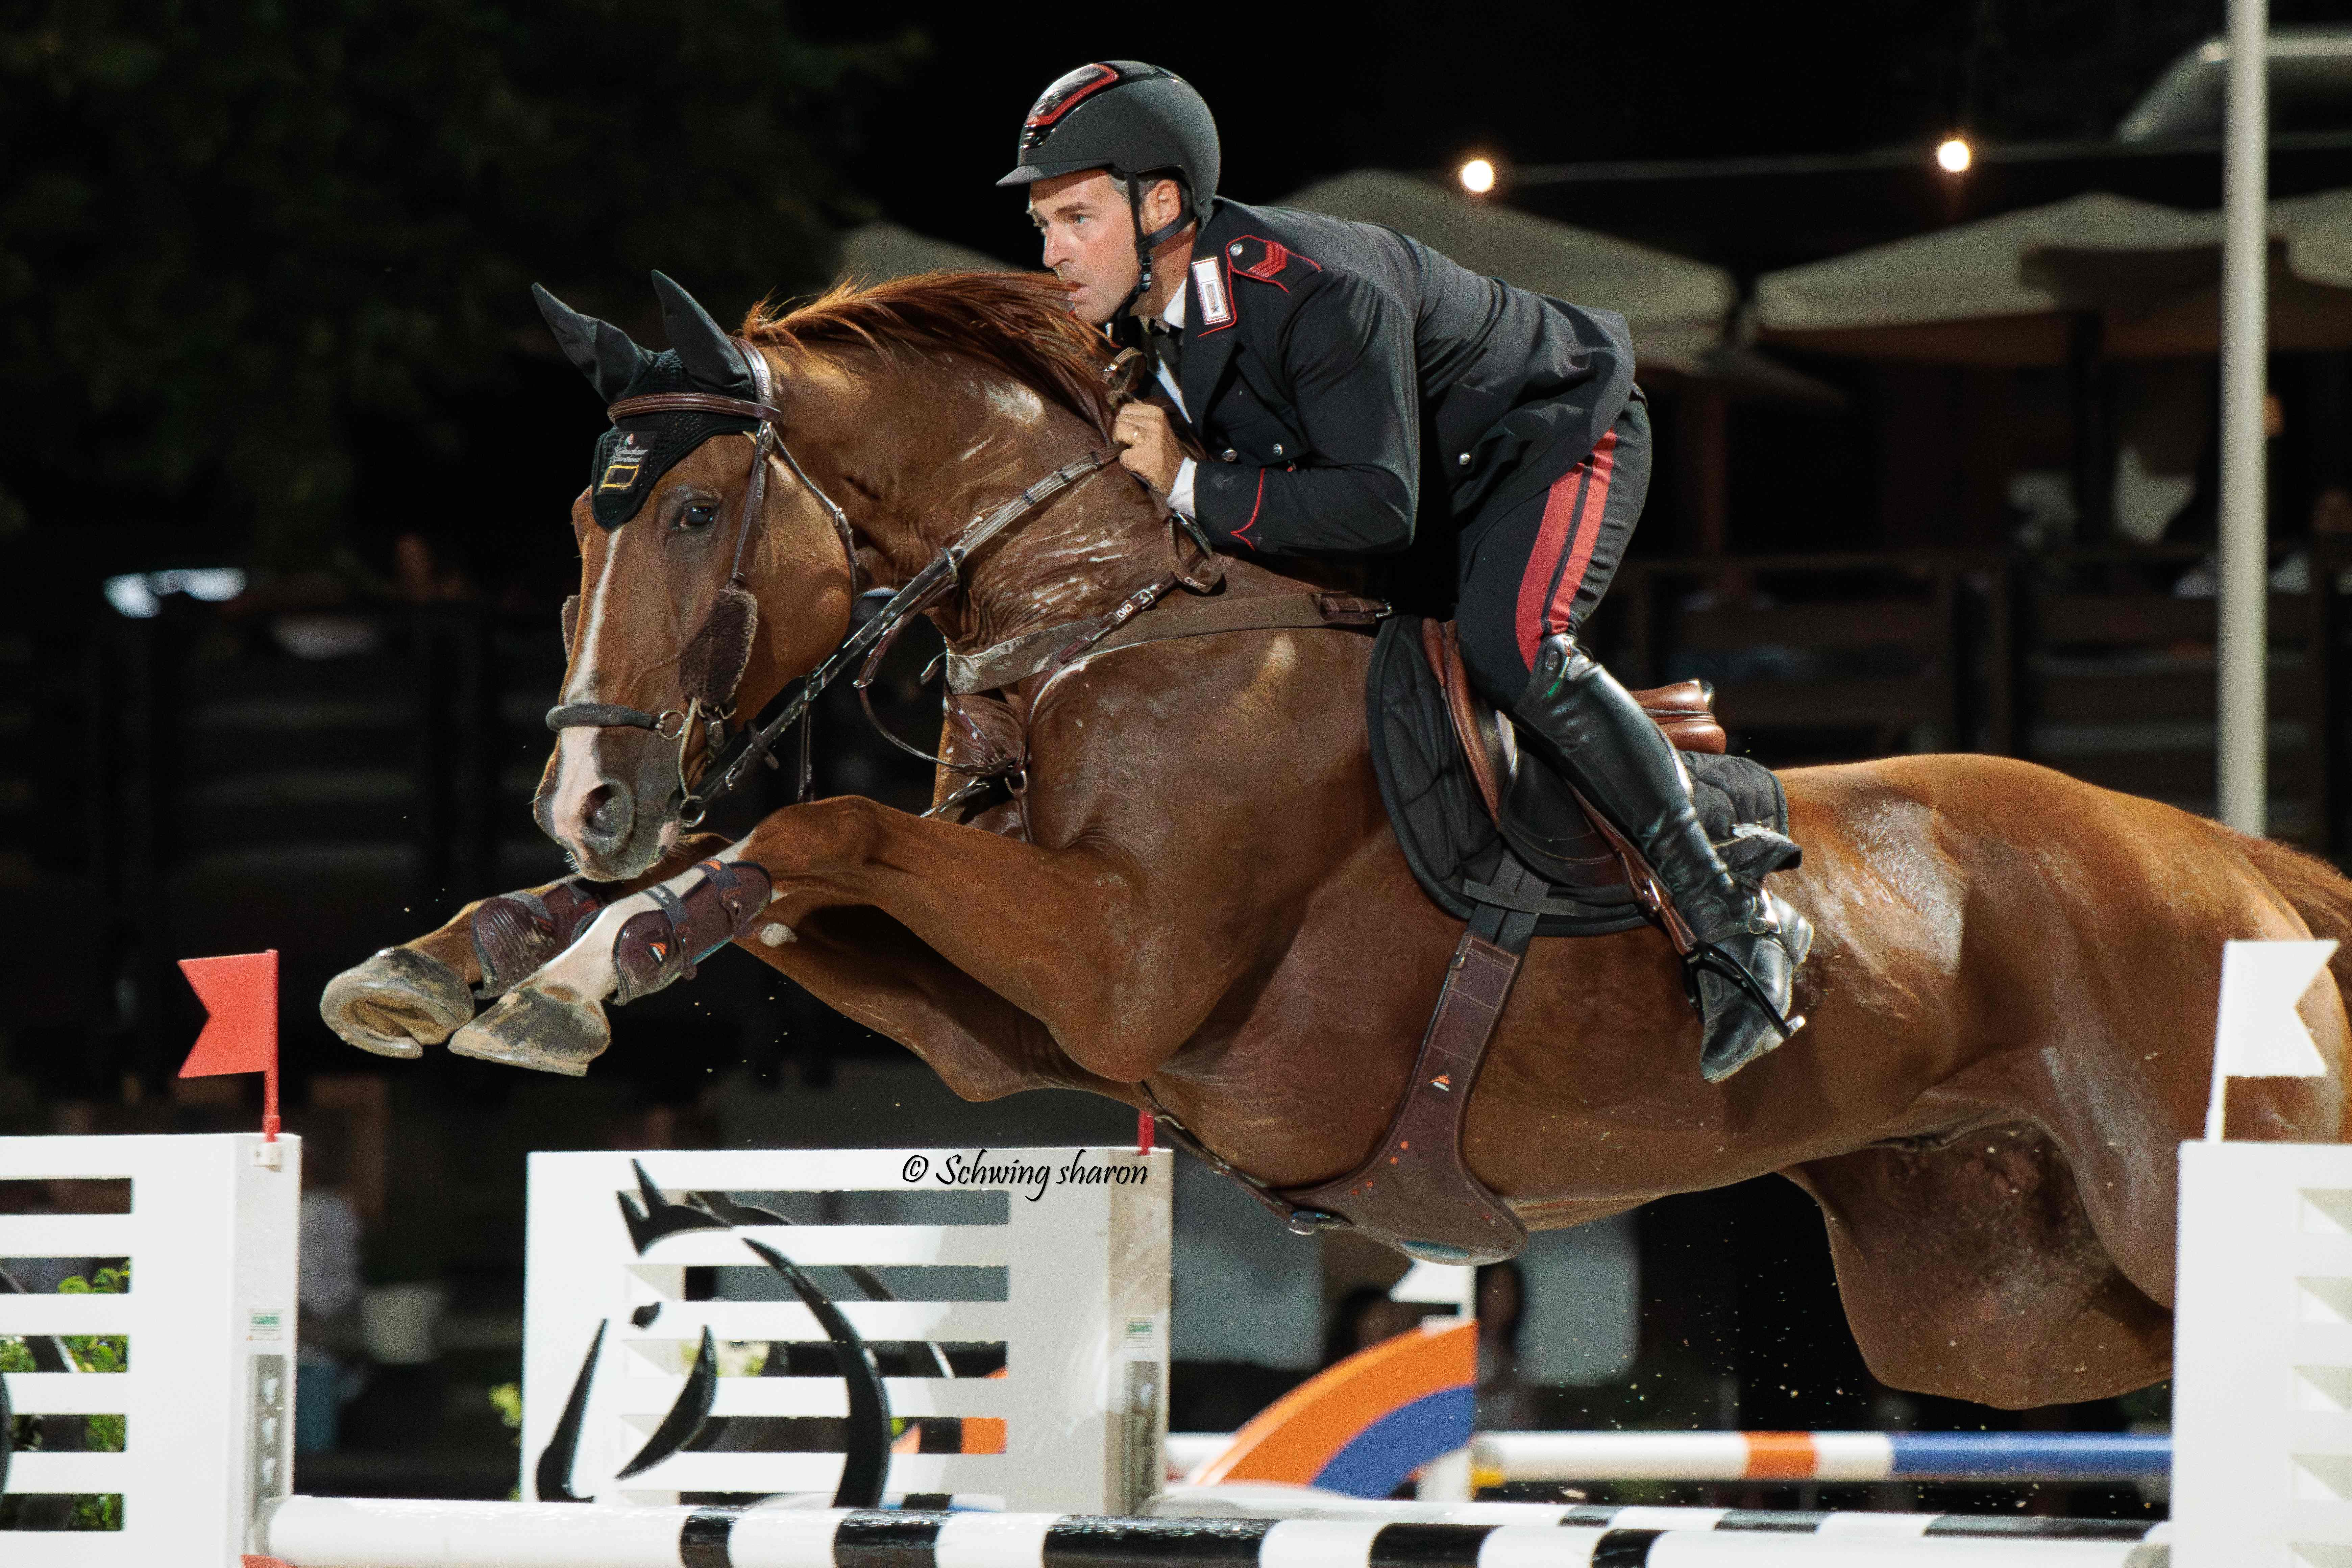 Emanuele Gaudiano and Chalou secure Friday's biggest win in CSI5* 1.55m at CHI Al Shaqab